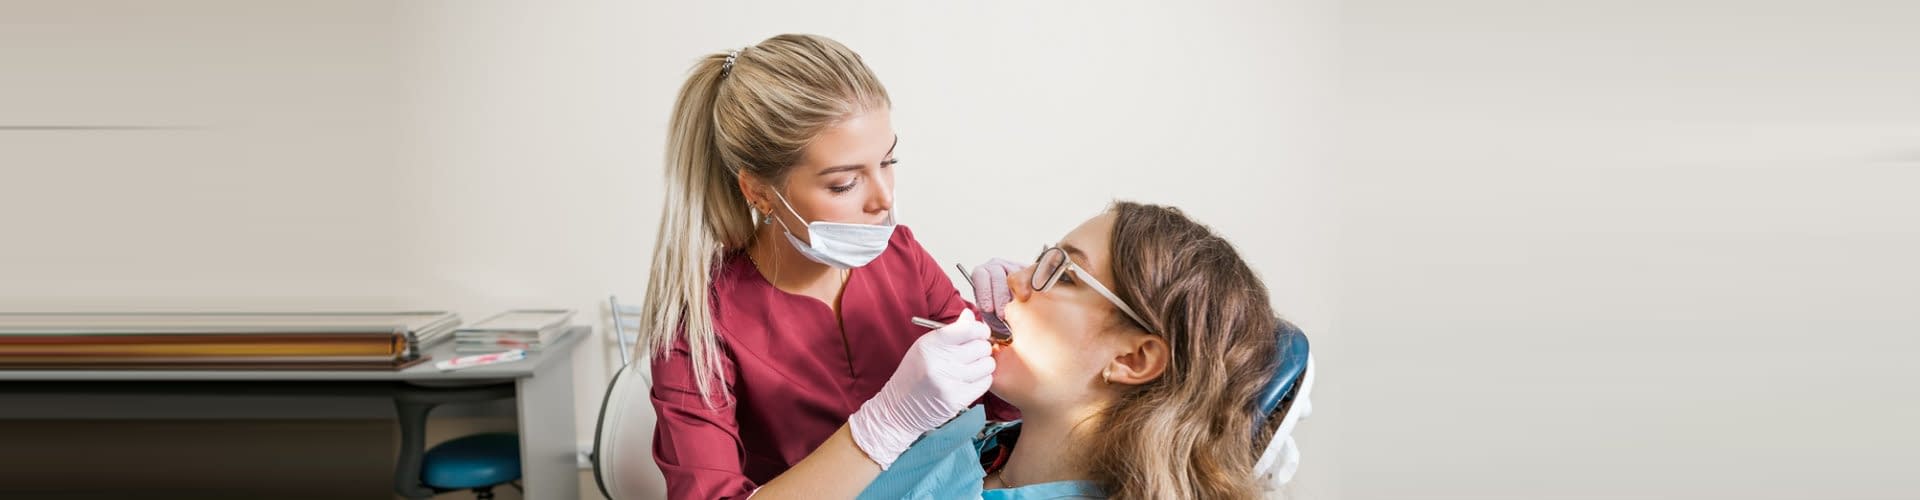 beautiful women dentist in the mask examines a patient in the dental office